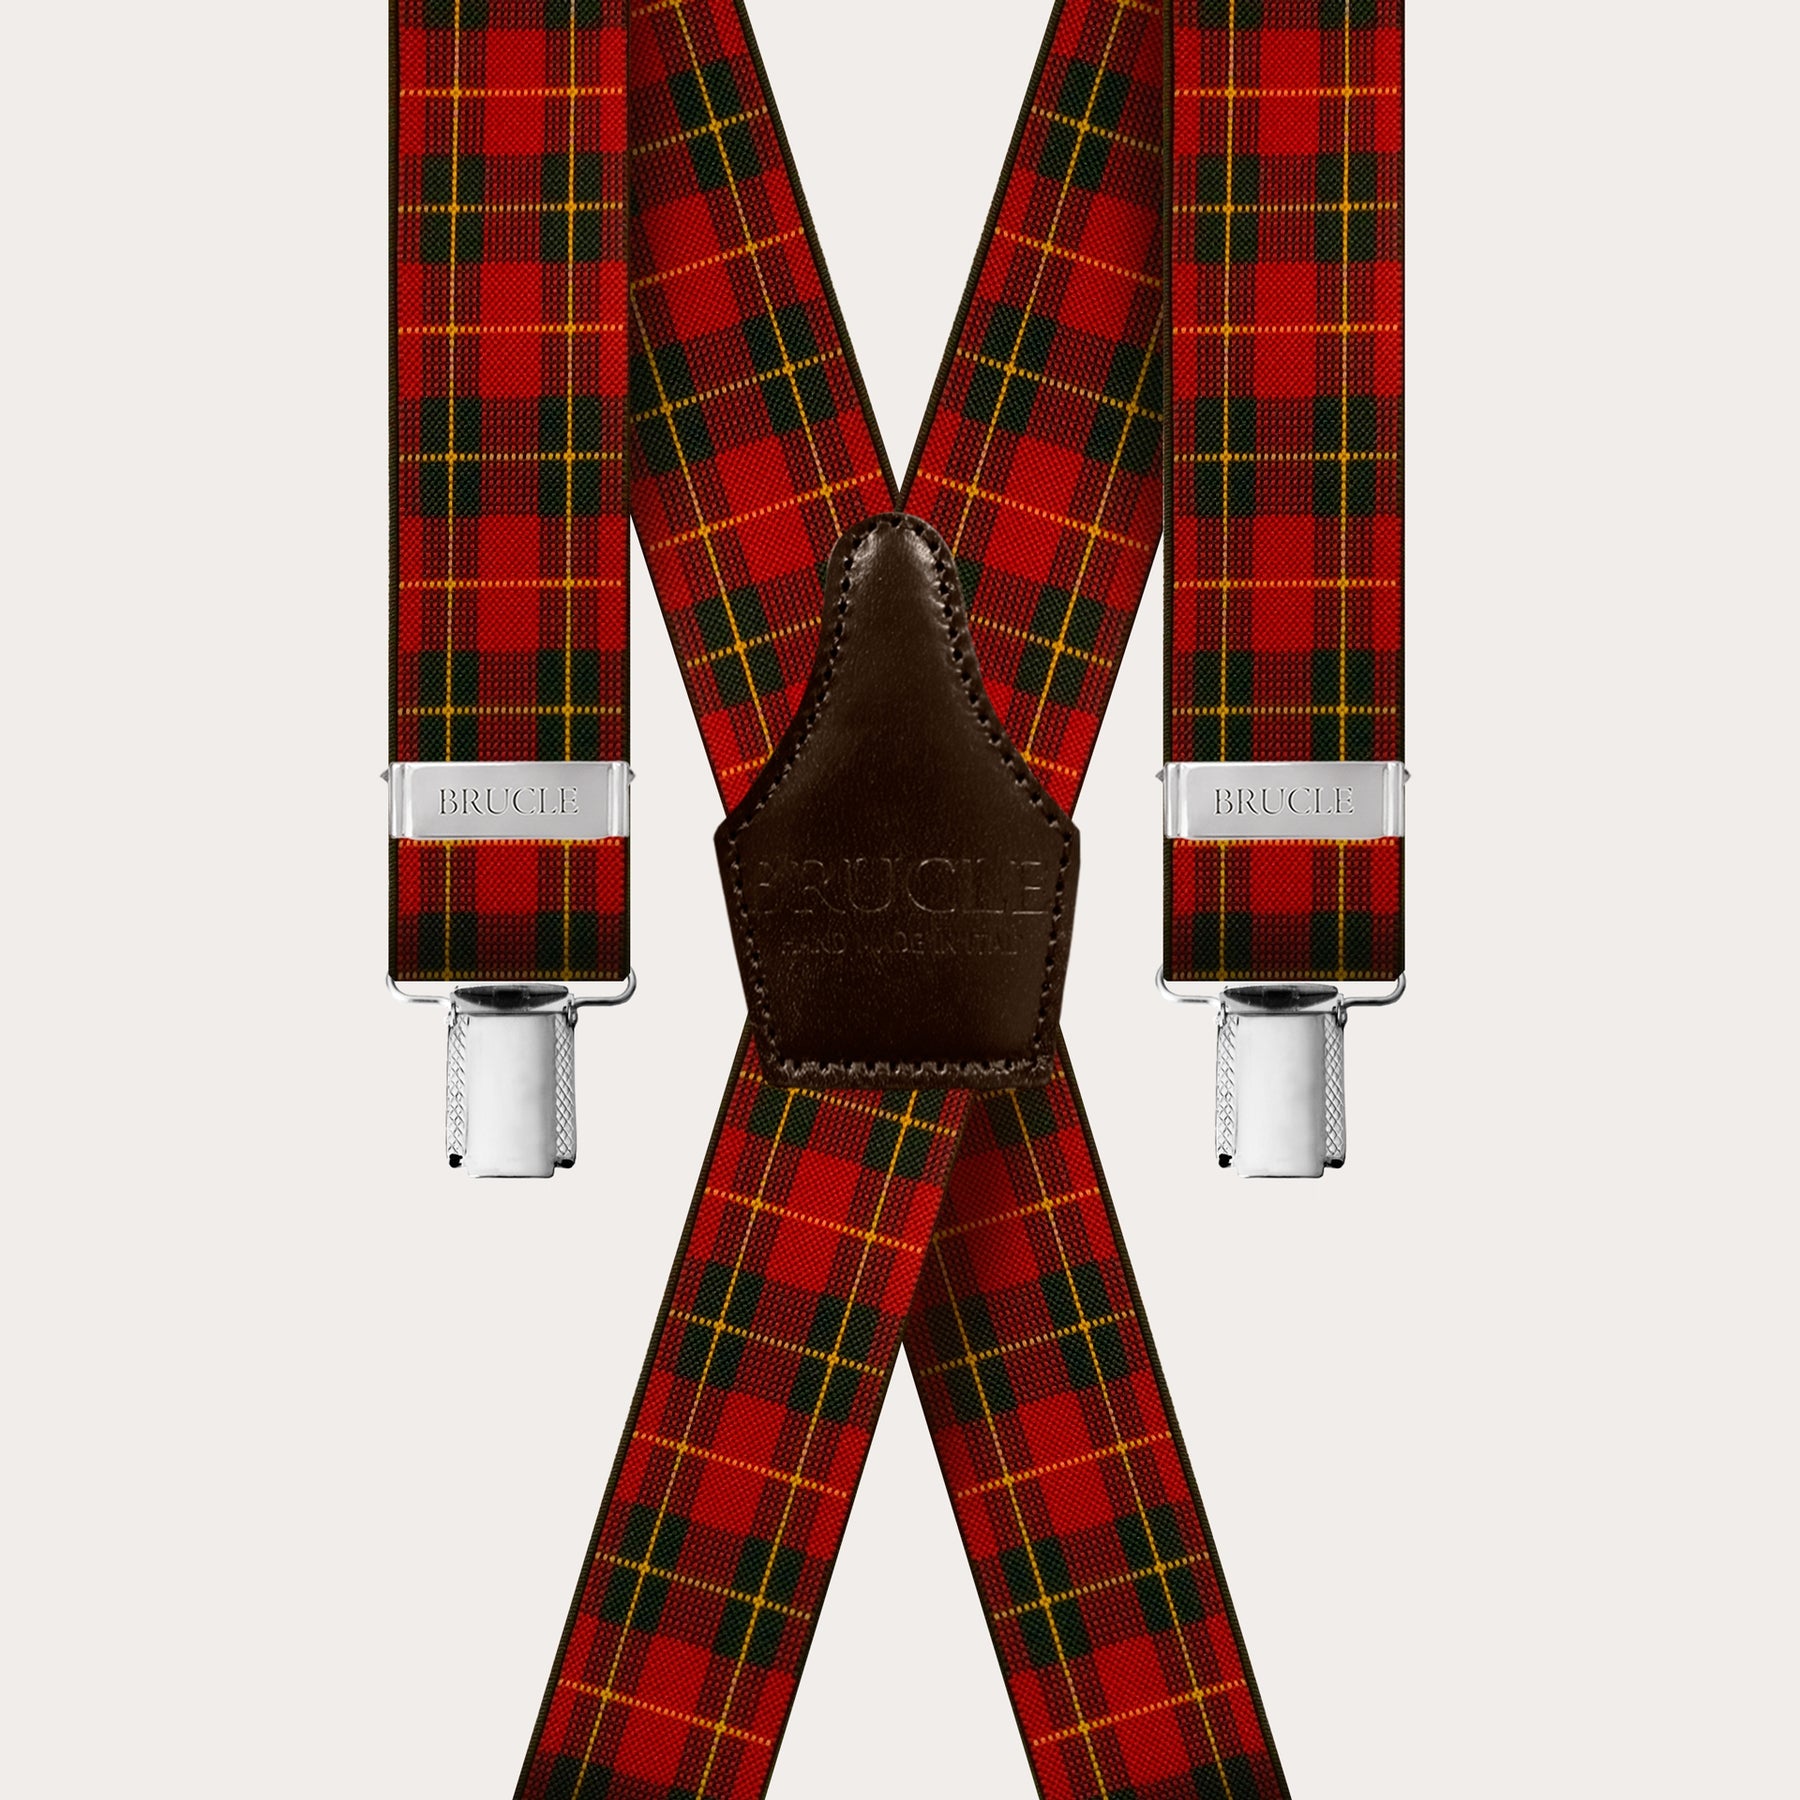 X-shape elastic suspenders with clips, red tartan